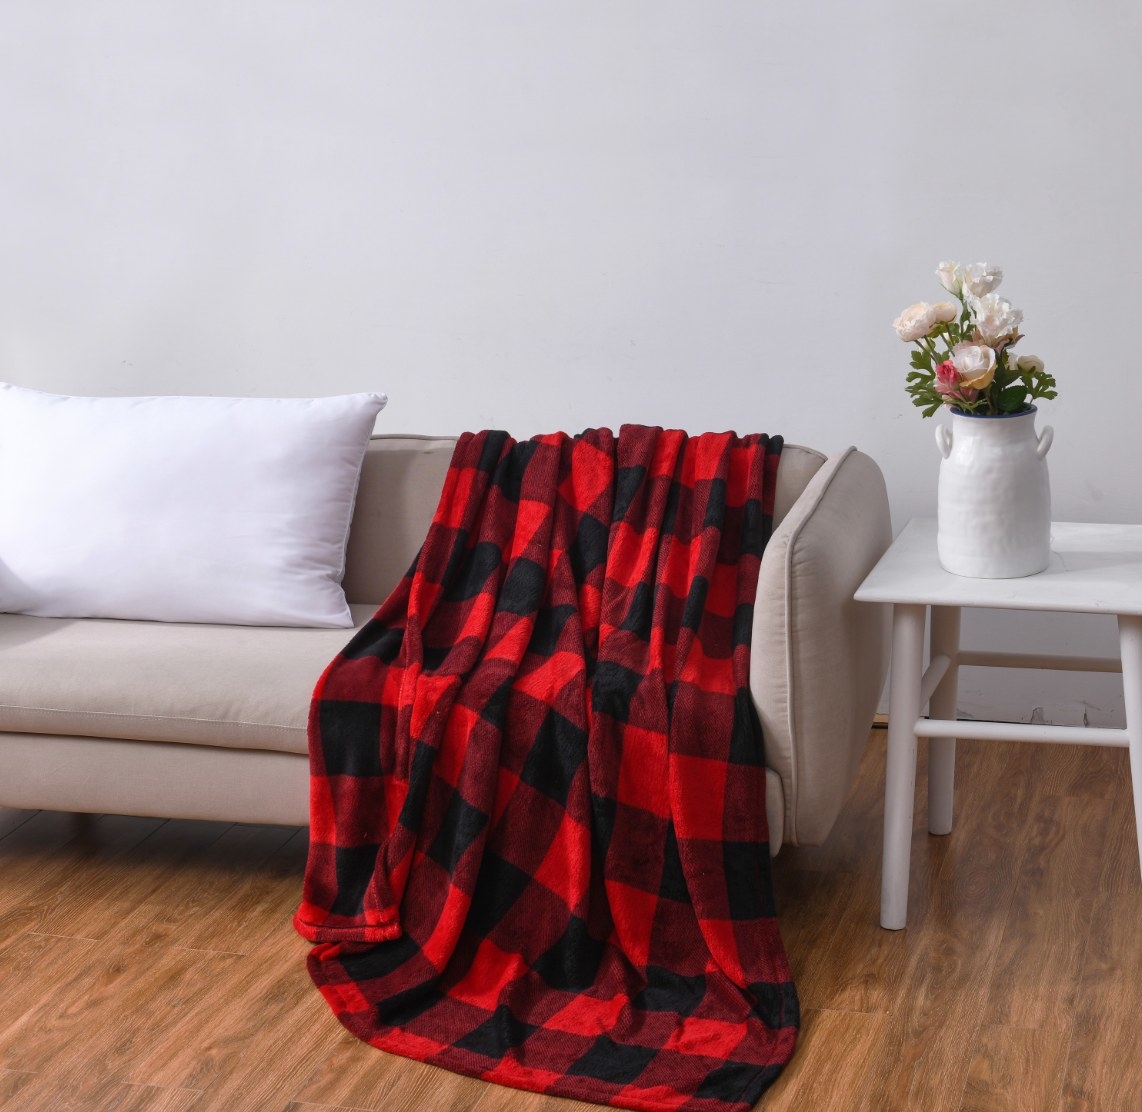 The plush oversized blanket in red